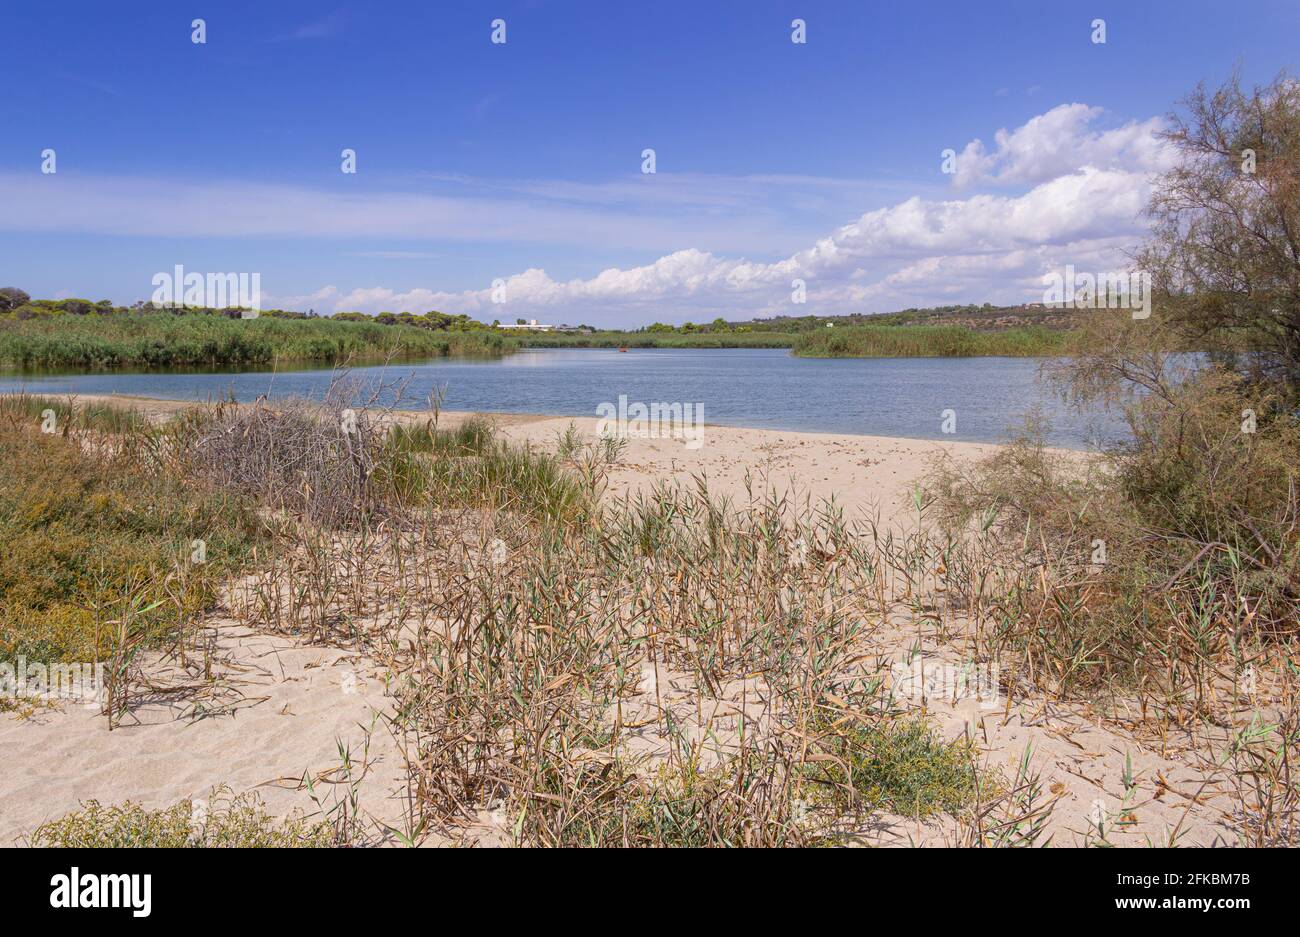 The “Litorale di Ugento” Regional Nature Park  in Apulia (Italy) boasts sandy beaches, wetlands behind the dunes, marshes, areas of woodland. Stock Photo